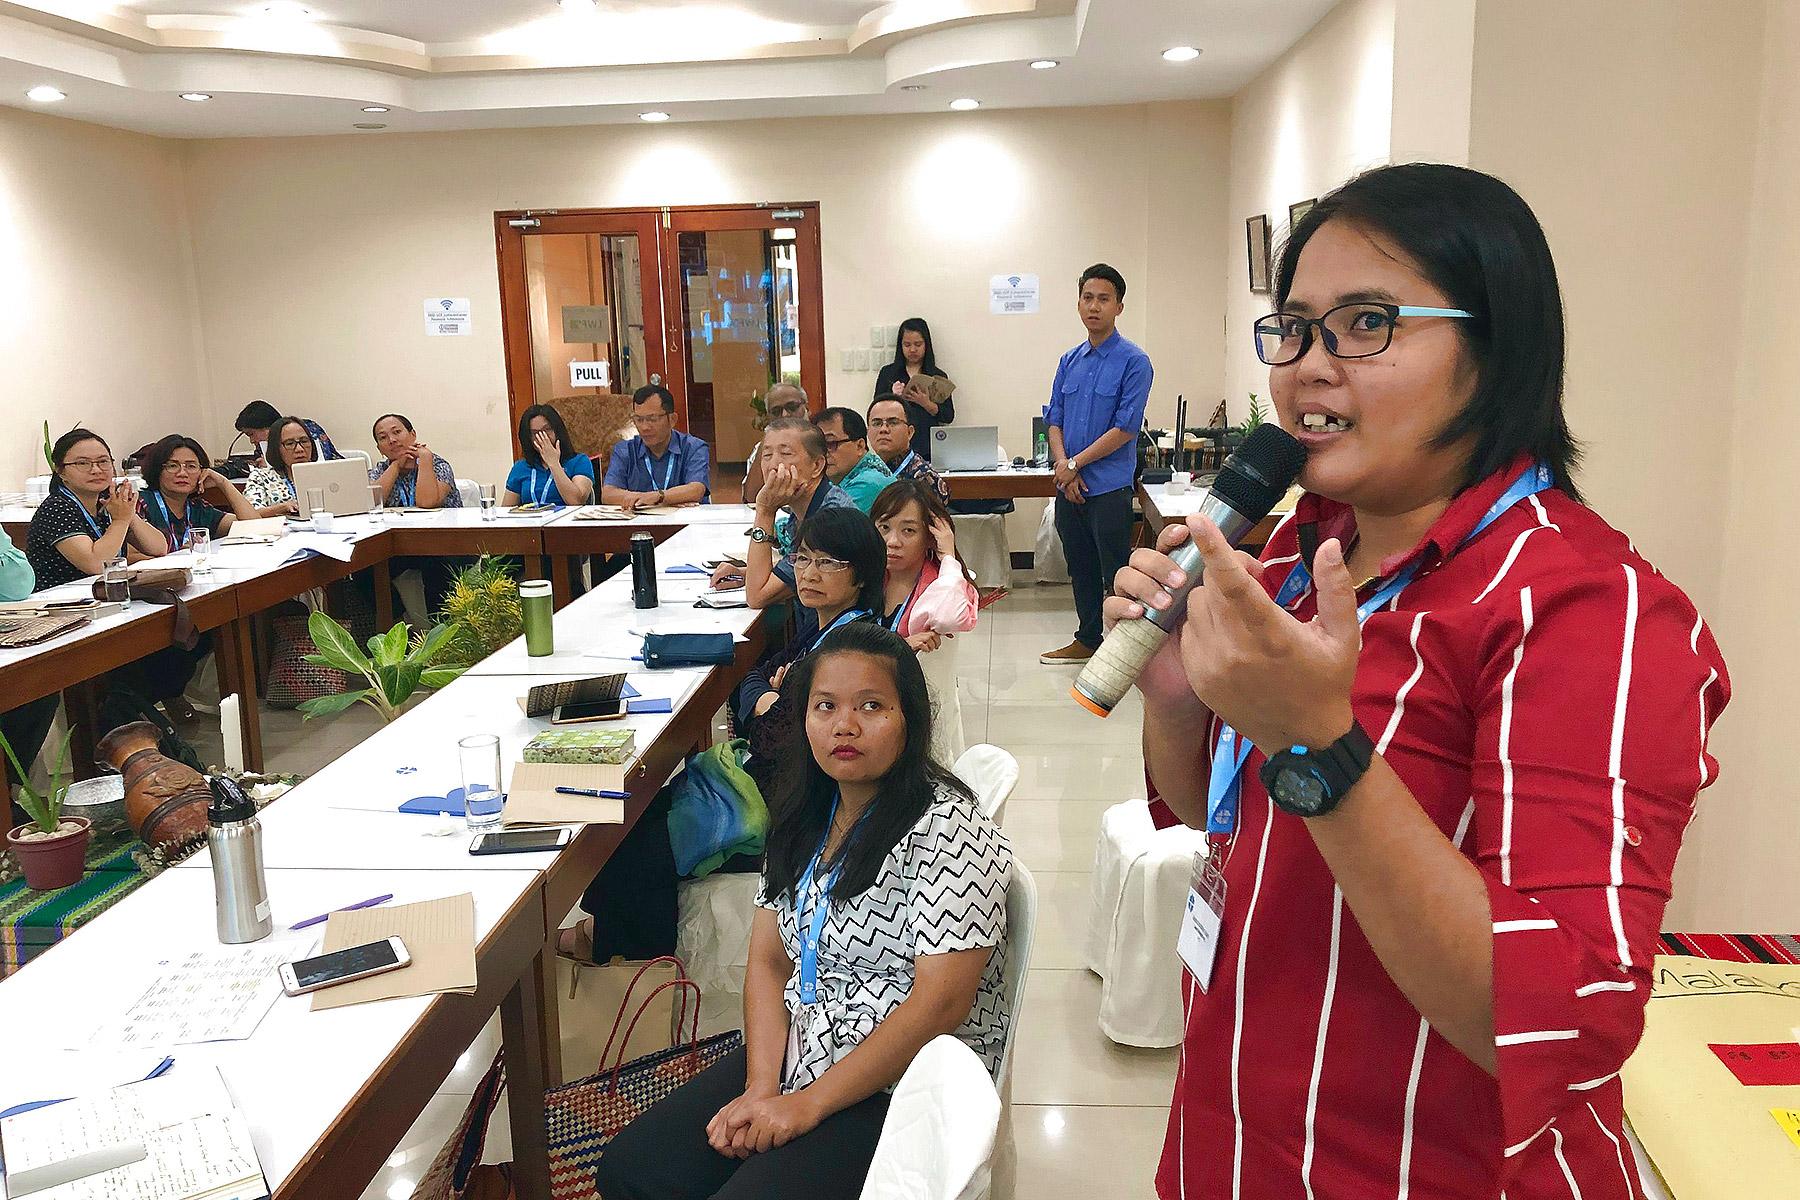 A workshop, hosted by the Lutheran Church in the Philippines, to enhance capacities for diakonia in the South-East Asian region. Jenet Mogimbong, diaconal worker from Malaysia, talks about her churchâs kindergarten project. Photo: LWF/M. DÃ¶lker